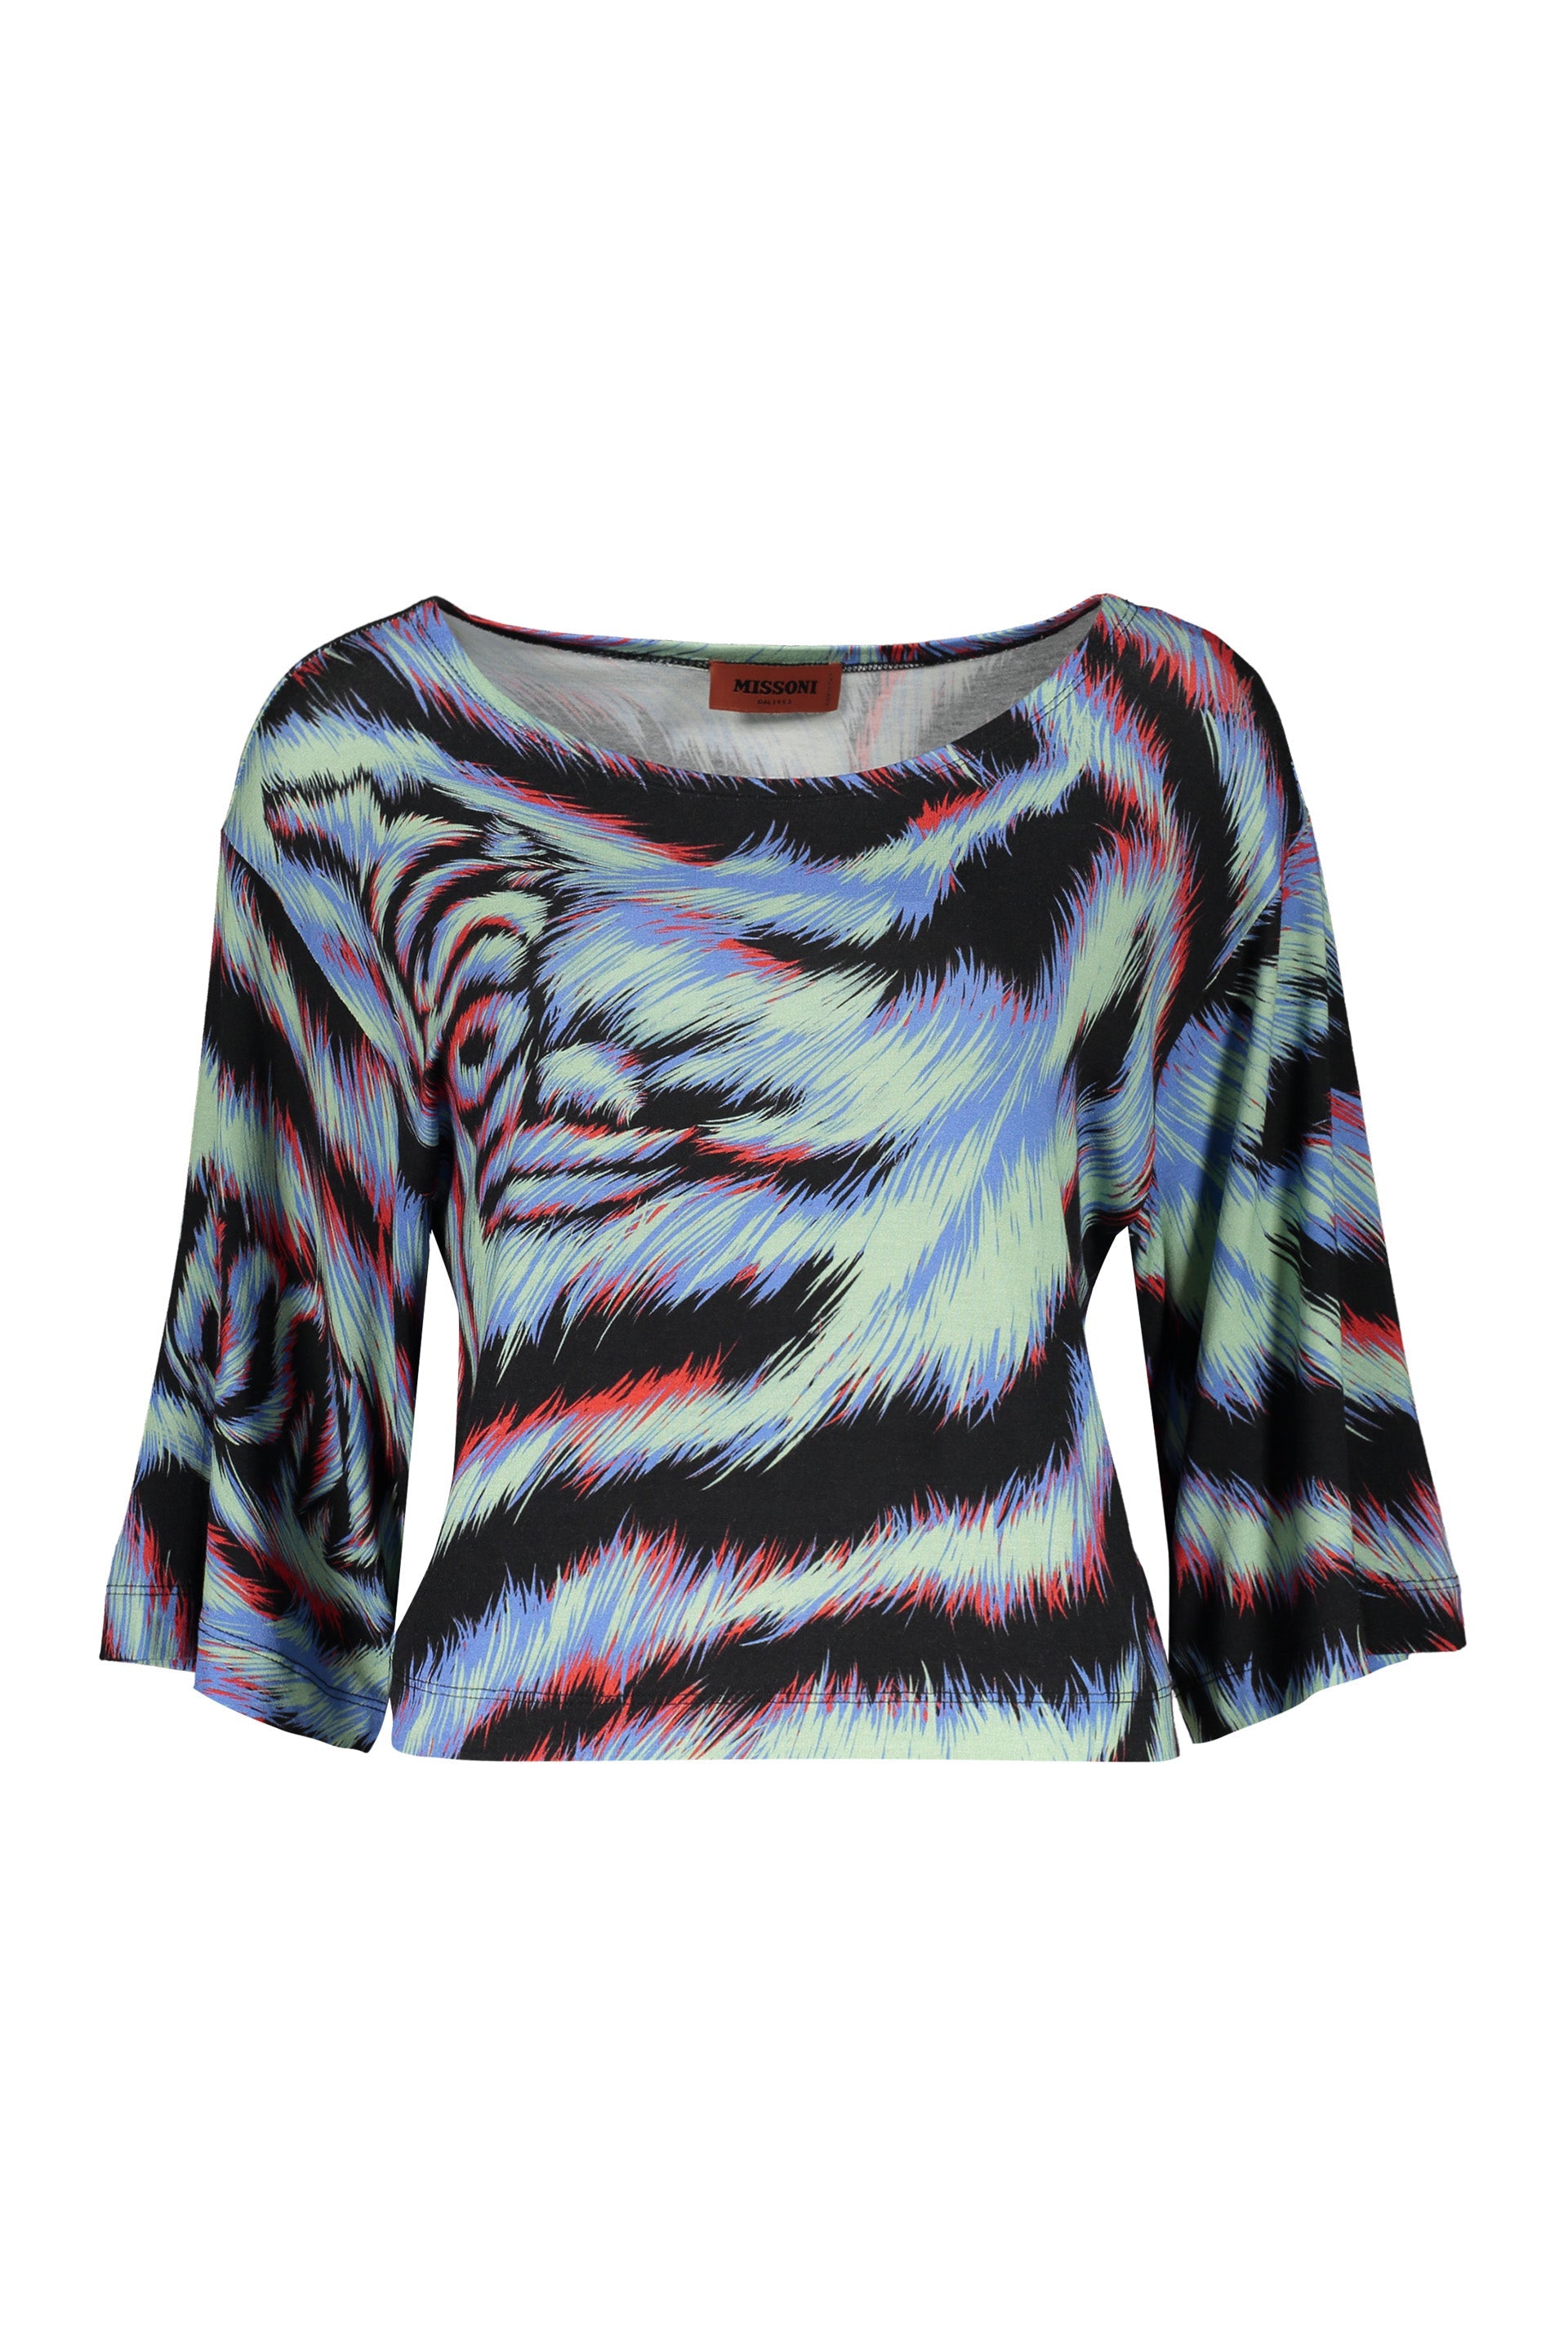 Missoni-OUTLET-SALE-Printed-cotton-top-Shirts-M-ARCHIVE-COLLECTION.jpg